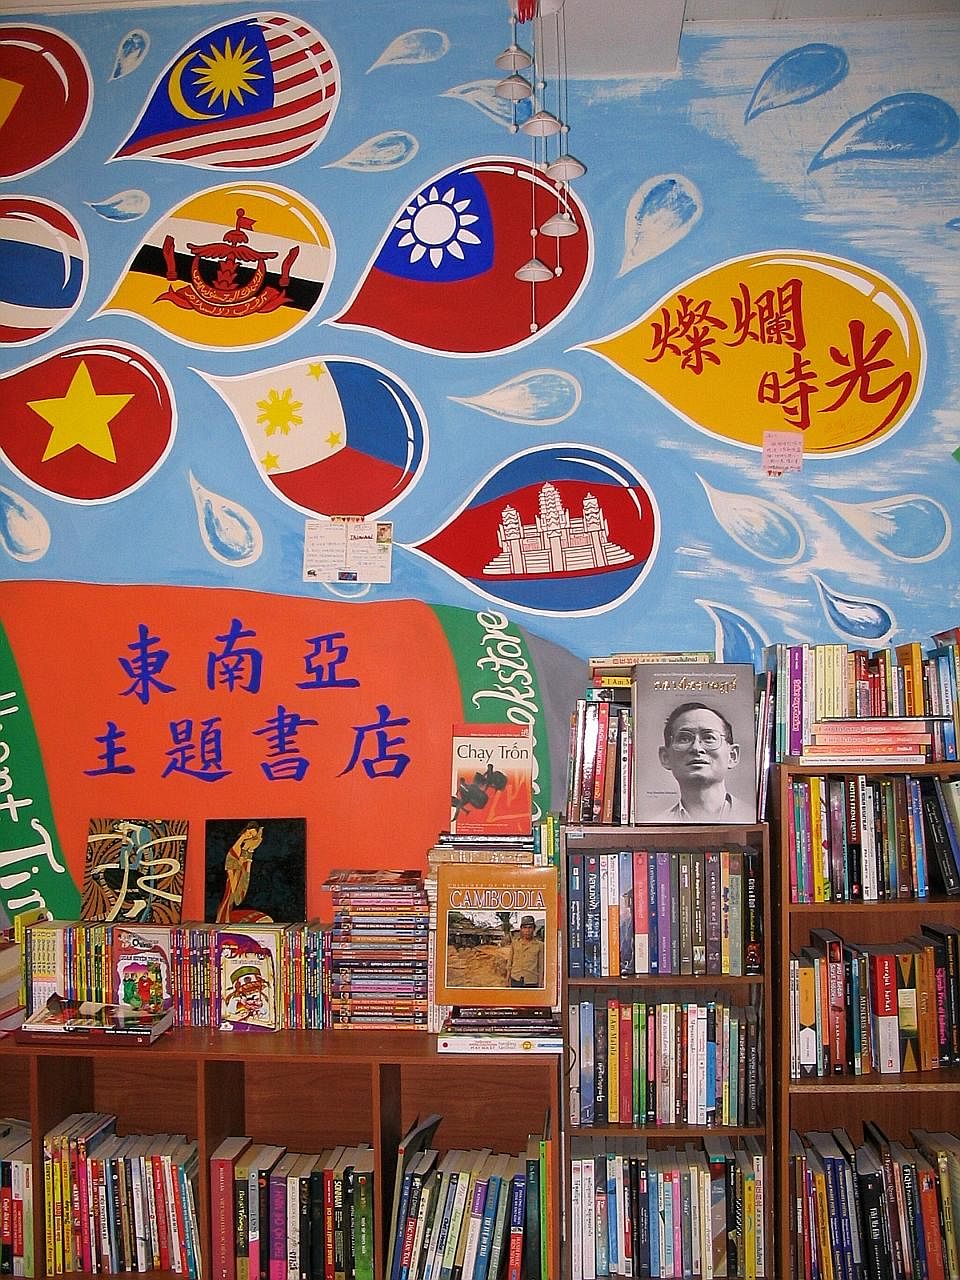 Brilliant Time, an independent bookstore in Taipei which stocks books with a South-east Asia theme. Taiwan's New Southbound Policy is aimed at boosting not just trade and investment but also education and cultural links between Taiwan and 18 countrie